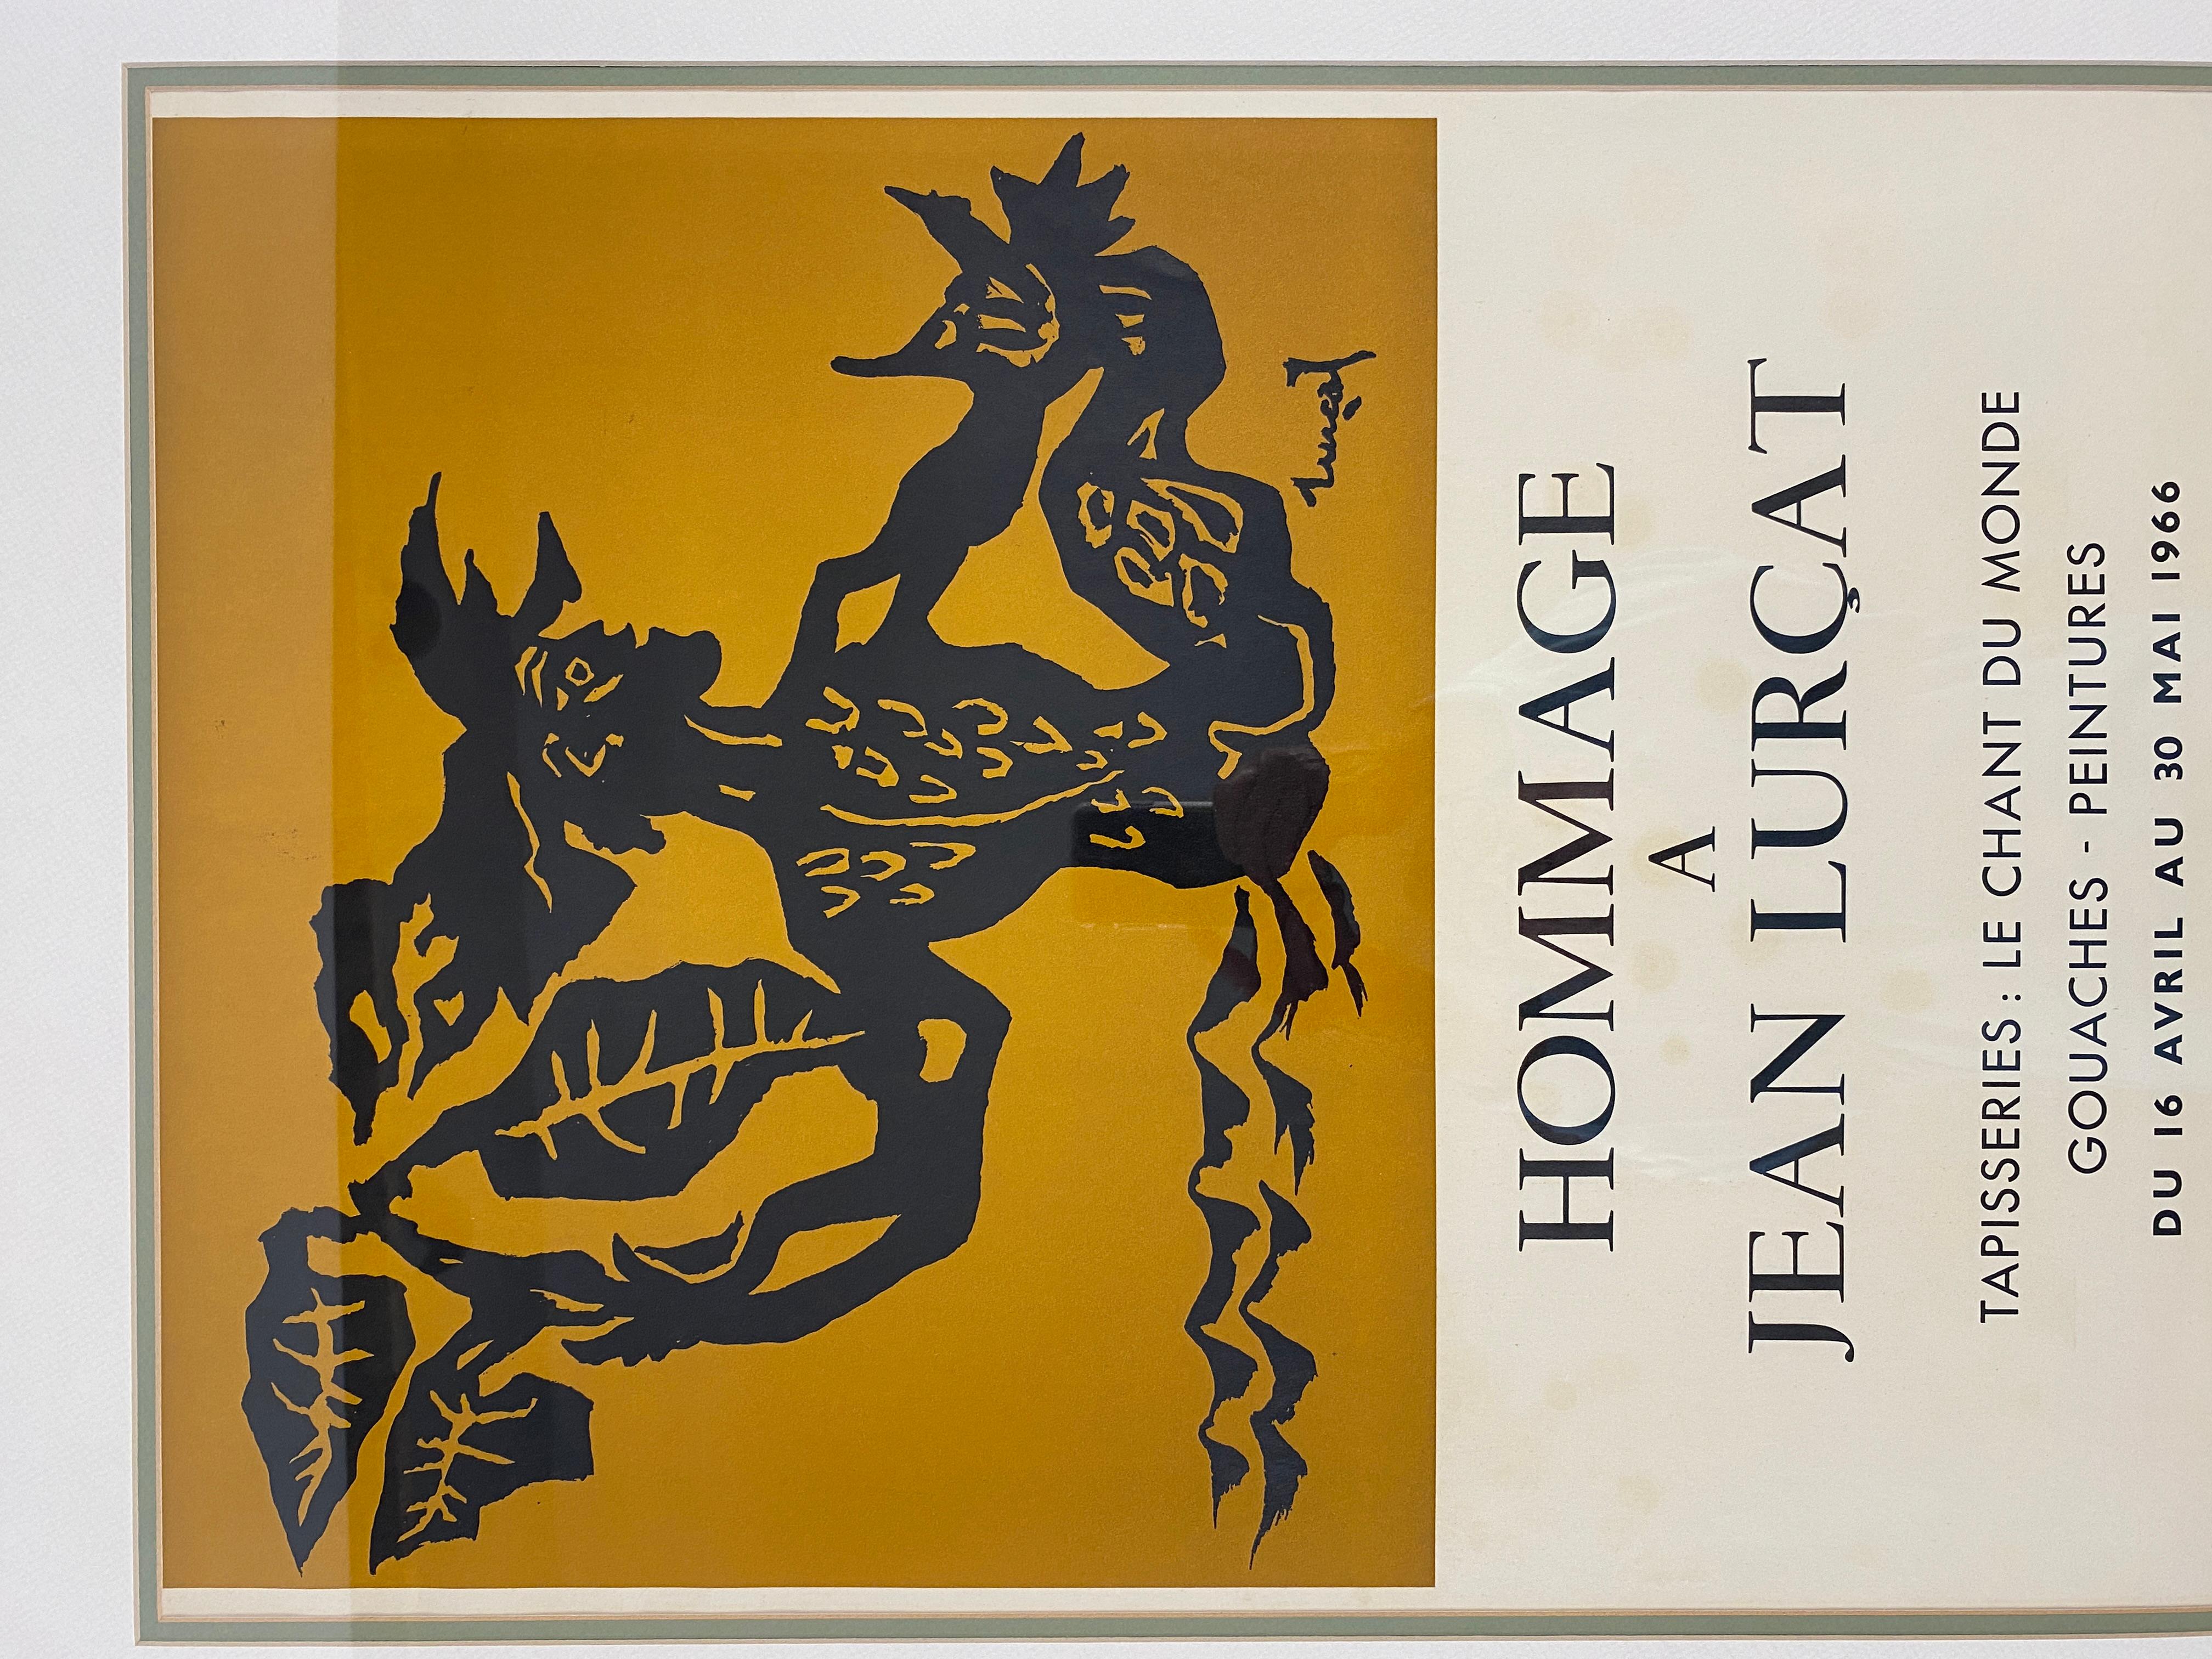 Large French mid-century poster paying tribute to Jean Lurçat. 

This stylish decorative art poster honors one of the most important French artists of contemporary paintings, ceramics and tapestry designs of the 20th Century. As illustrated in the